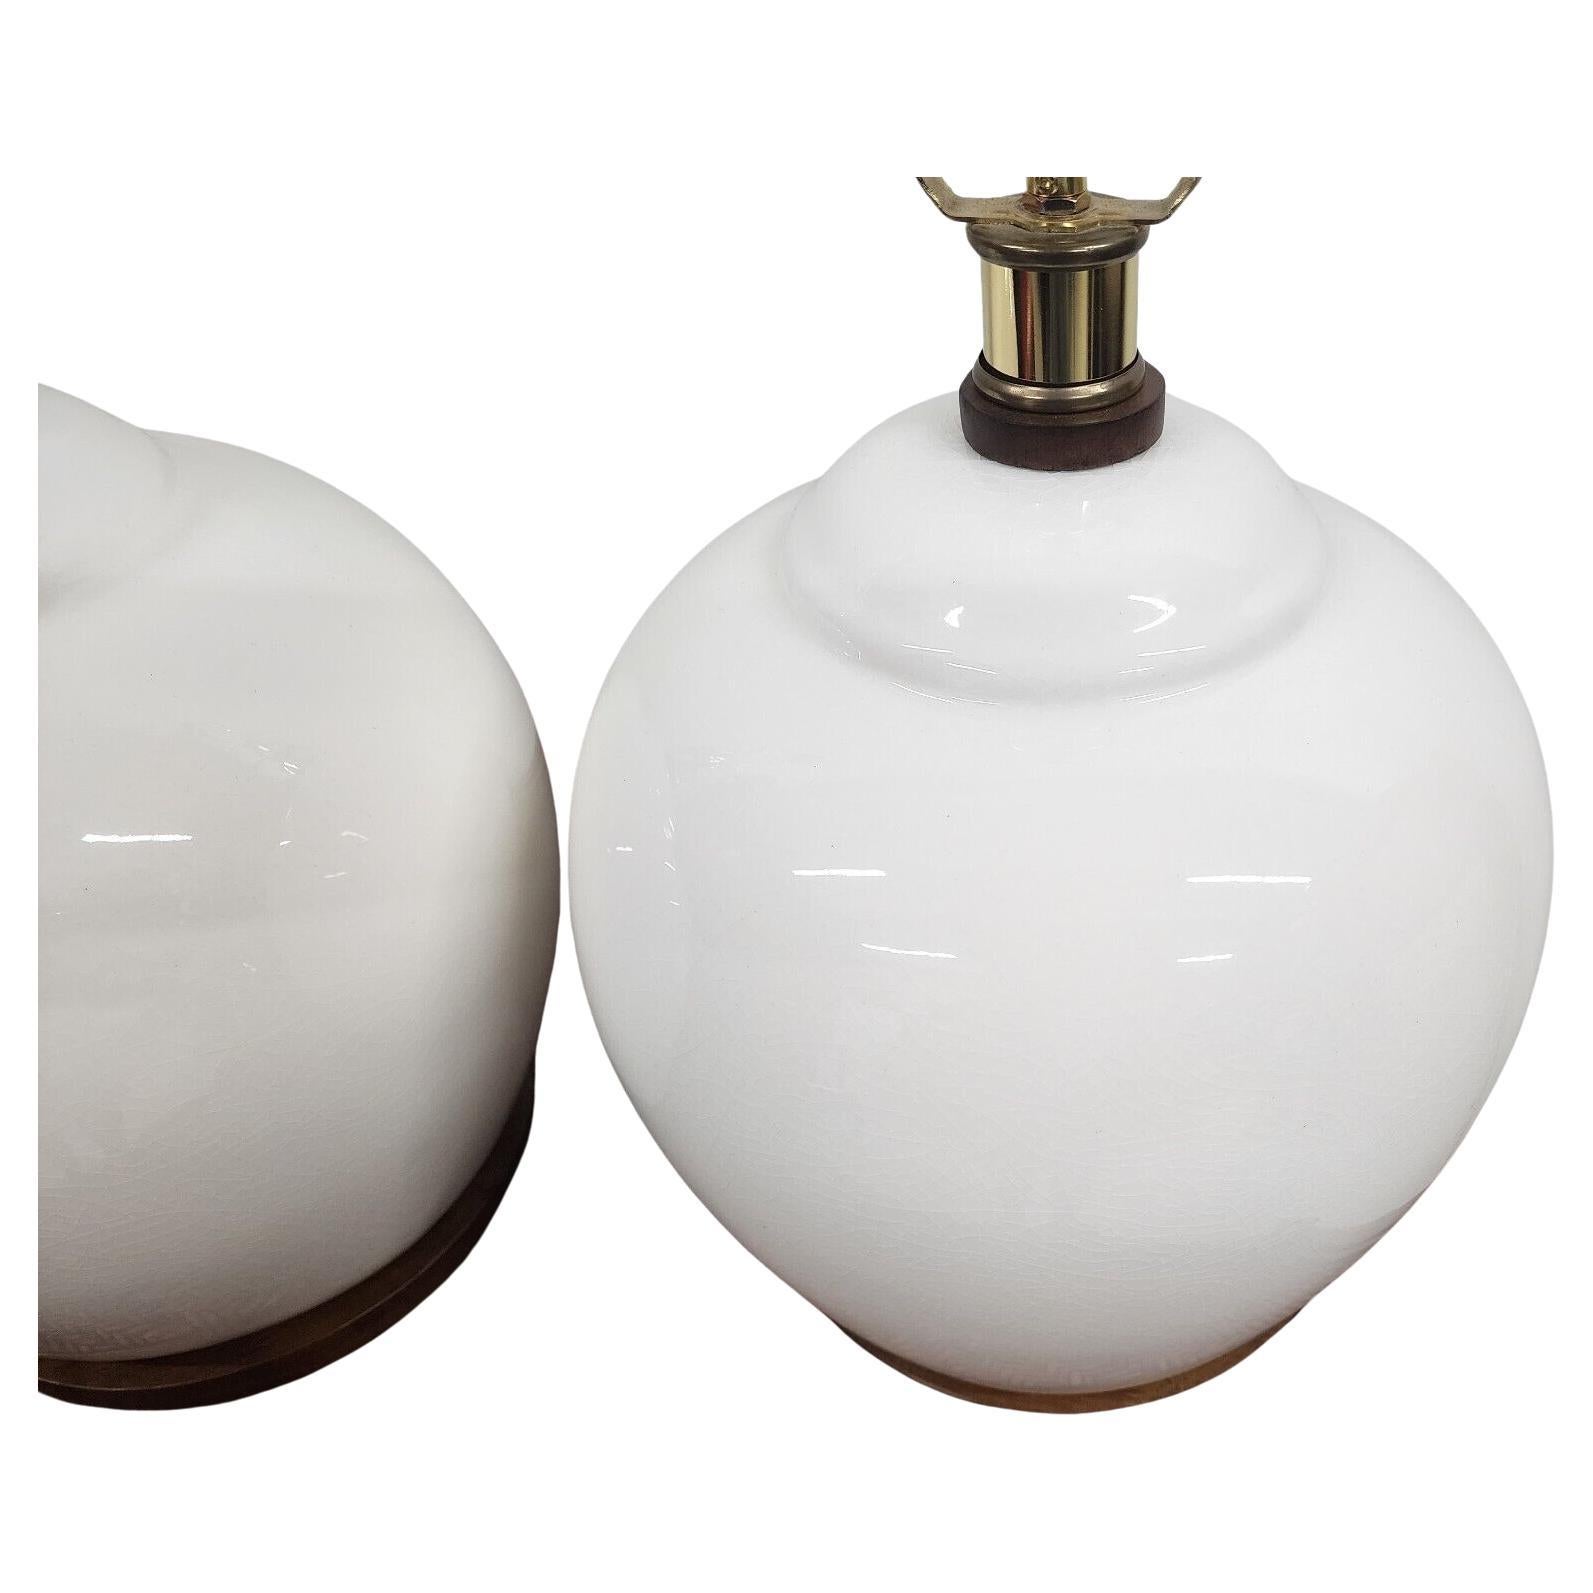 For FULL item description click on CONTINUE READING at the bottom of this page.

Offering One Of Our Recent Palm Beach Estate Fine Lighting Acquisitions Of A
Pair of Ralph Lauren Ceramic Table Lamps in Eggshell White with Crackle Finish
On a Wood